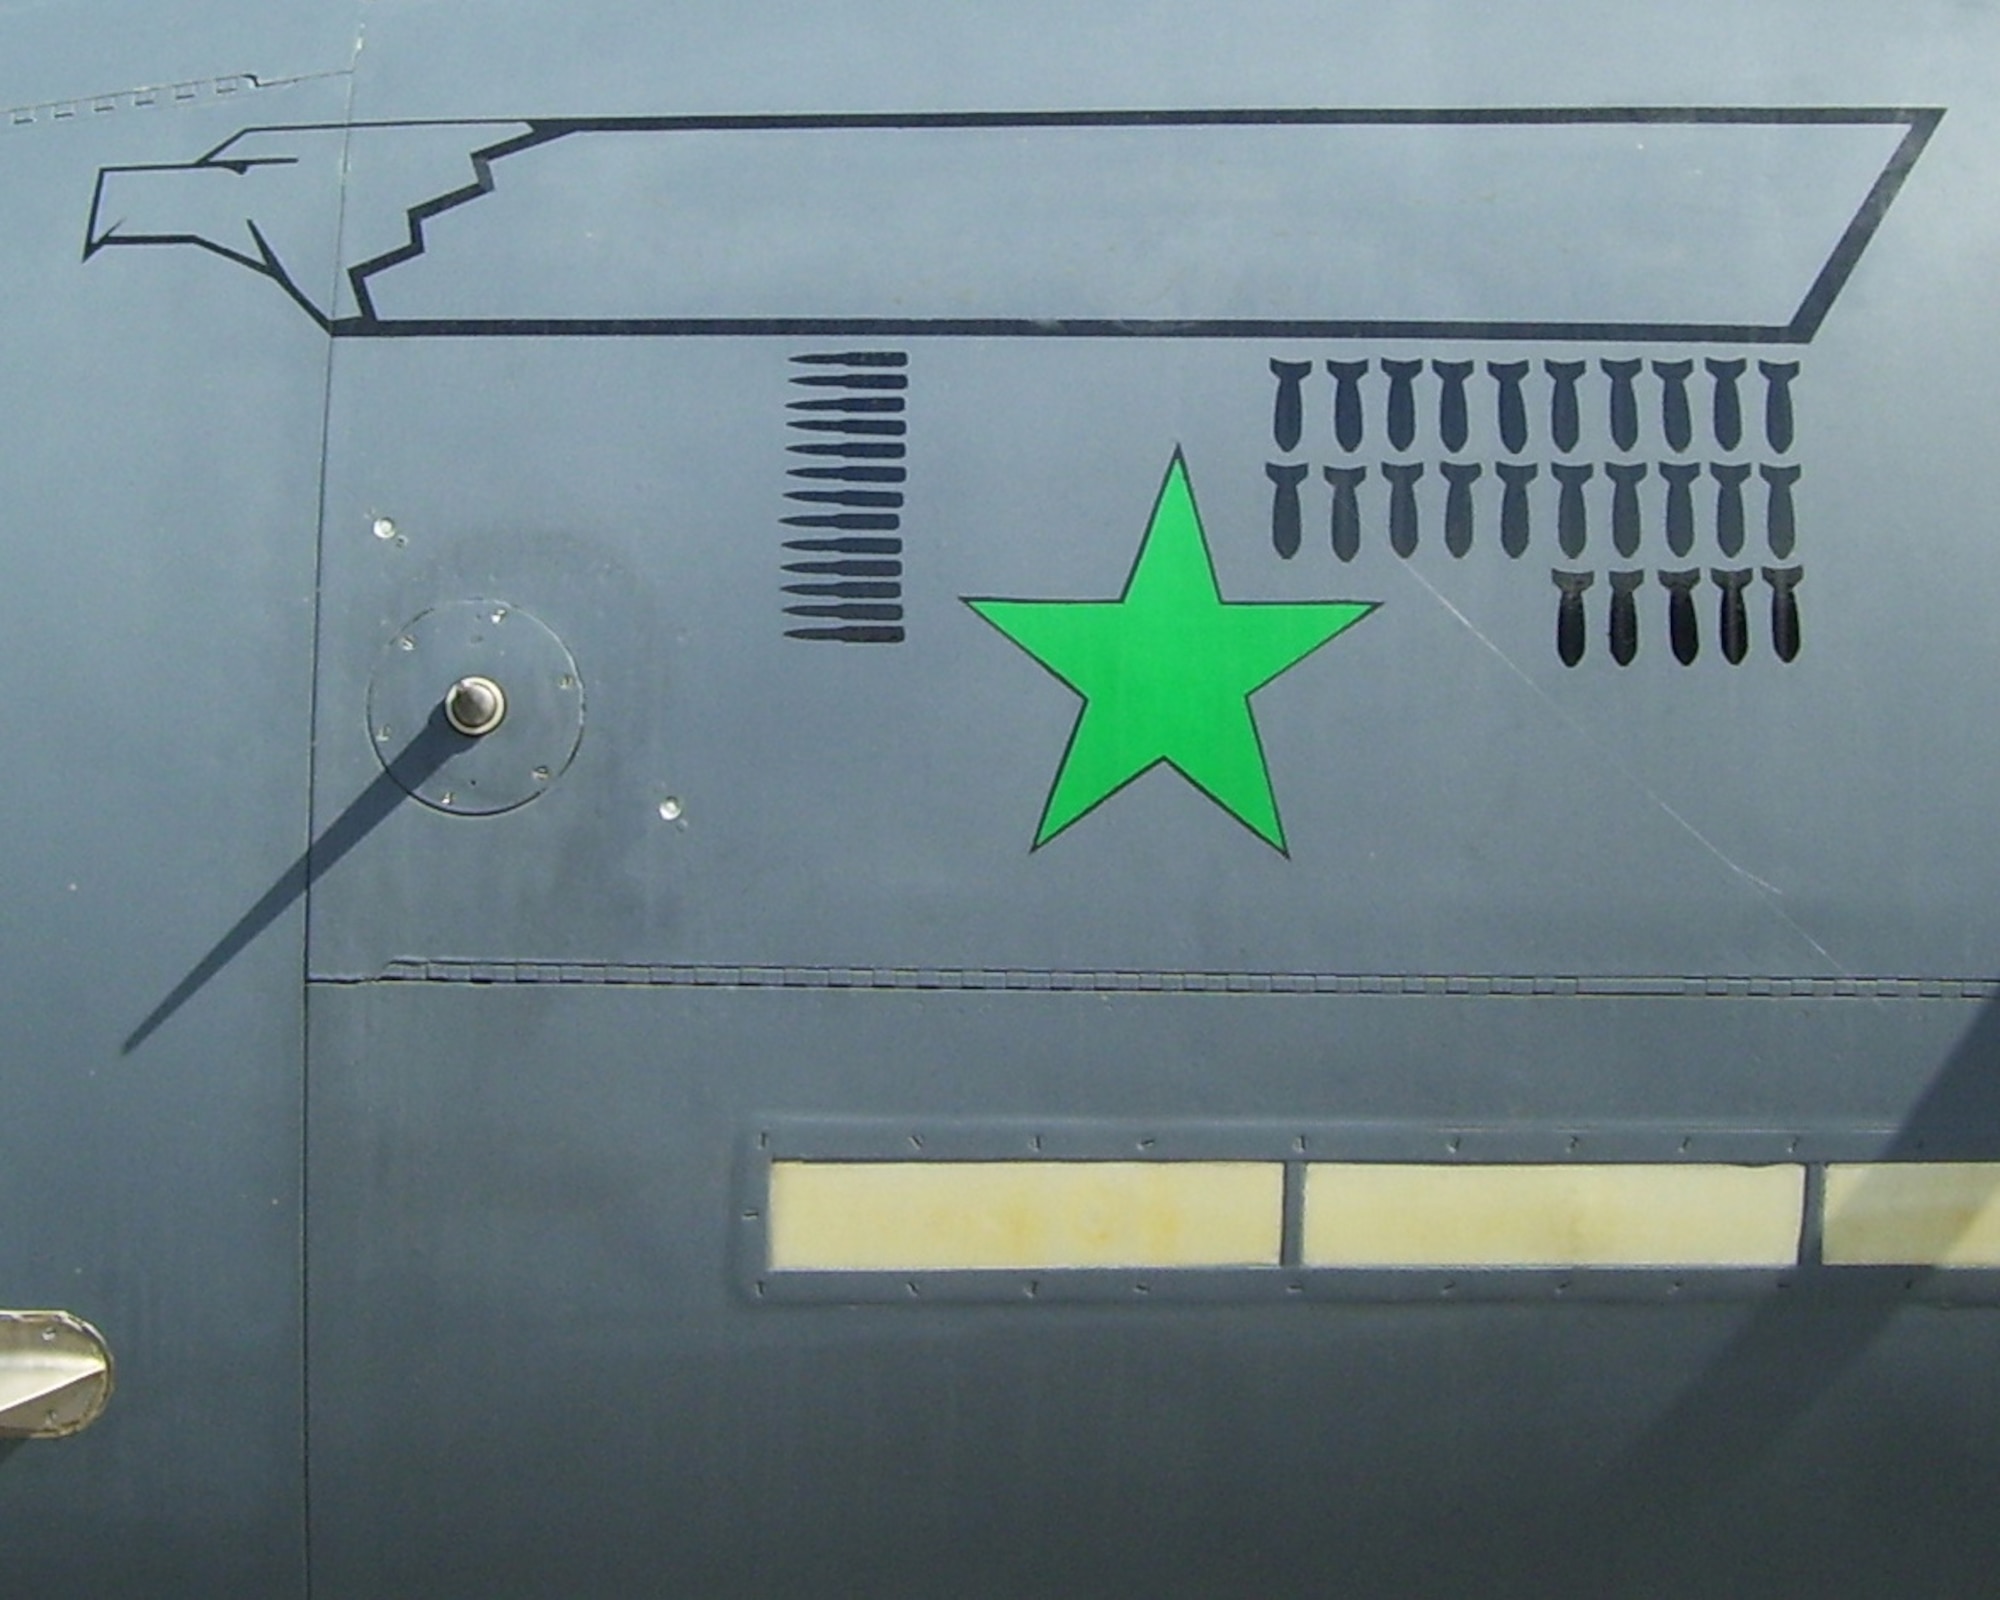 BAGRAM AIR FIELD, Afghanistan -- The green star on Aircraft #89-0487 represents an air-to-air victory achieved during Operation Desert Storm. 335th Expeditionary Fighter Squadron flight crews continue to add to the aircraft’s historic scoreboard. (U.S. Air Force photo by James D’Angina)